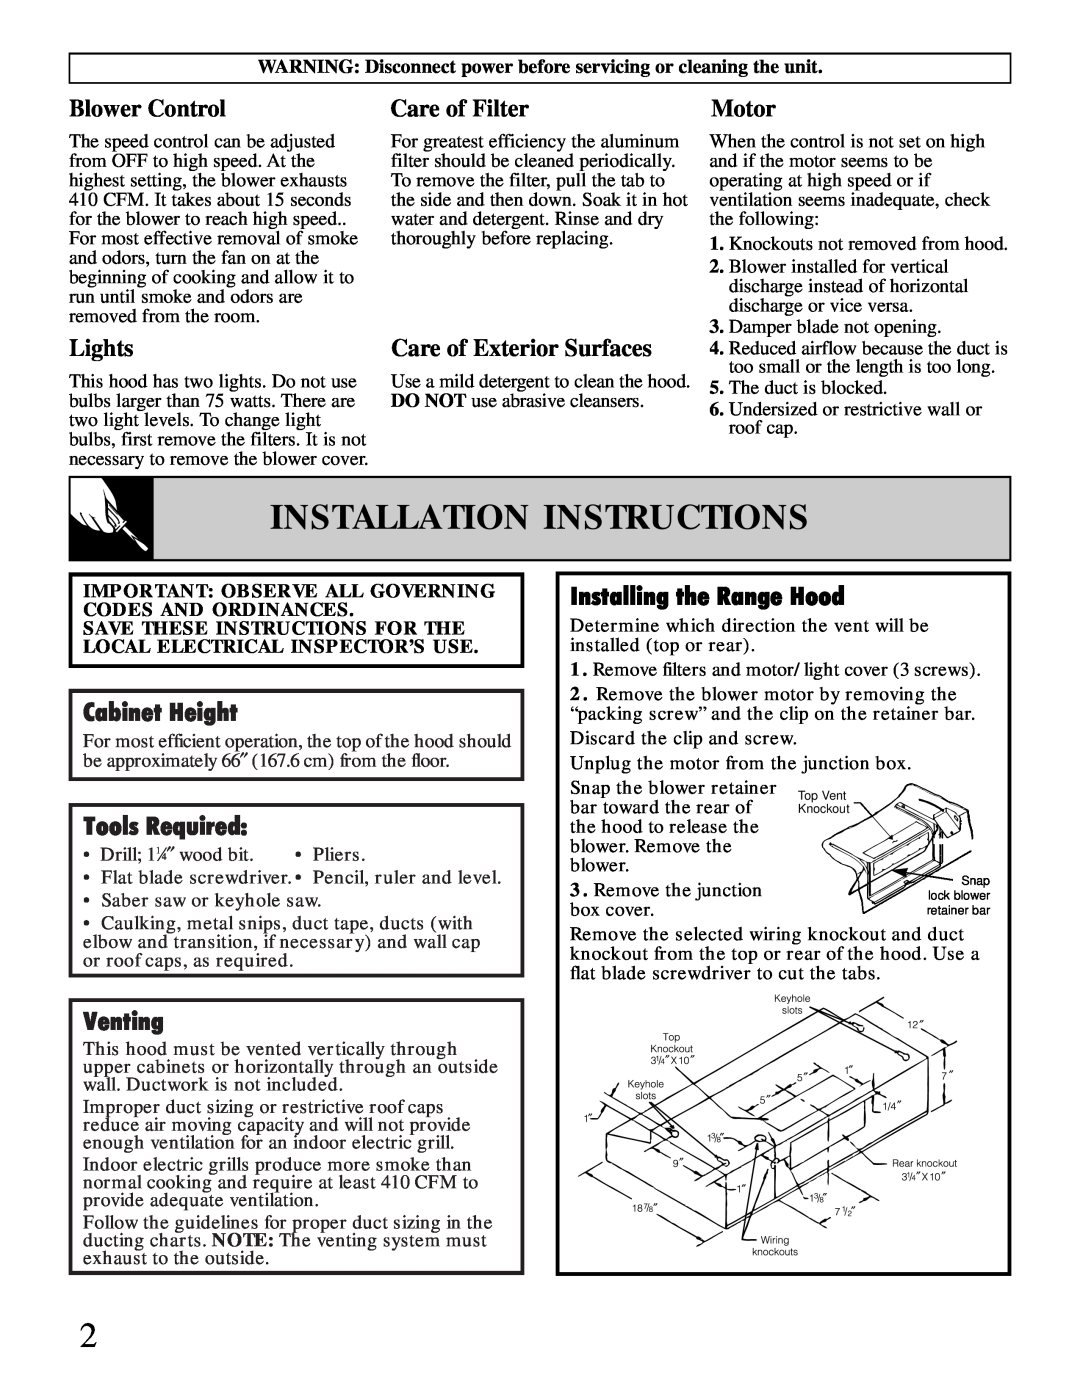 GE JV376 Installation Instructions, Cabinet Height, Installing the Range Hood, Tools Required, Venting, Blower Control 